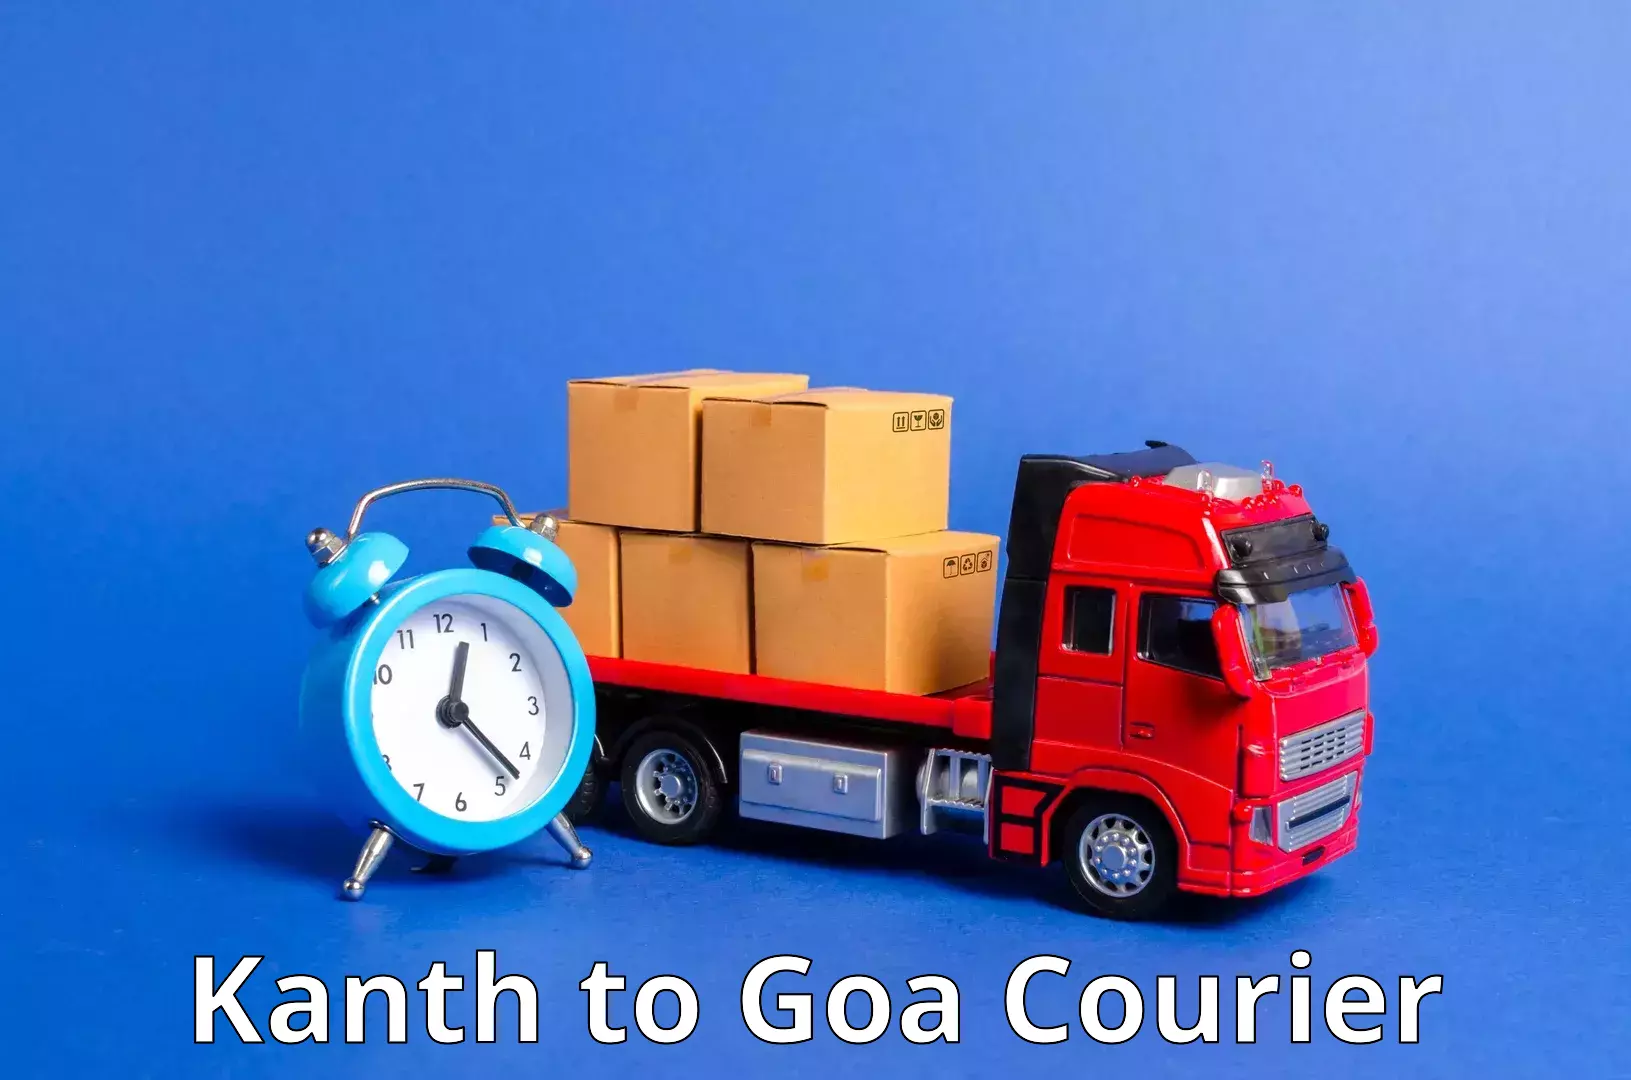 24-hour courier service in Kanth to Panaji